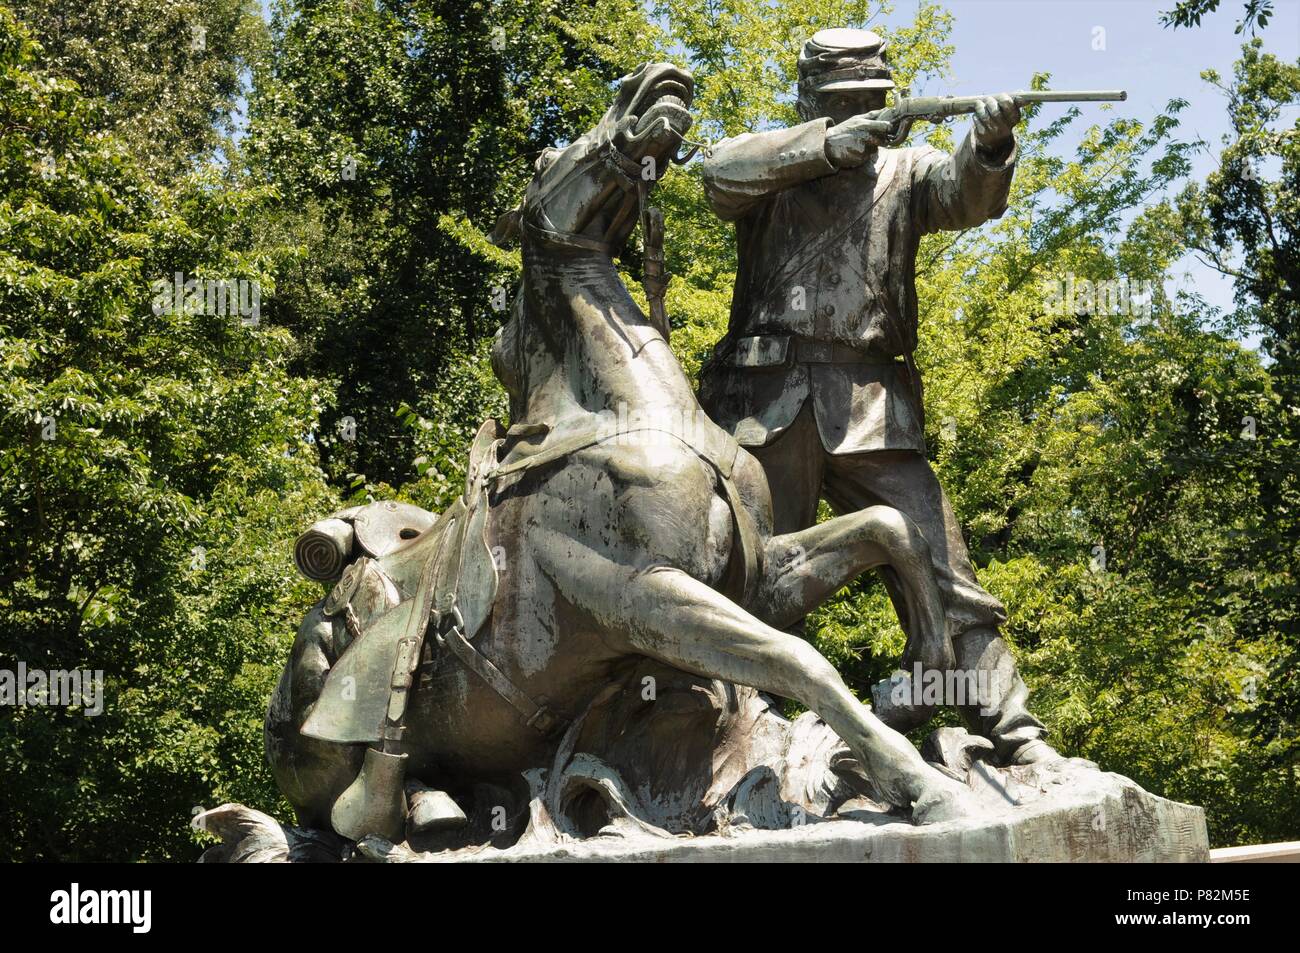 Cavalryman statue on the Wisconsin Monument in the Vicksburg National Military Park, Vicksburg, Mississippi Stock Photo